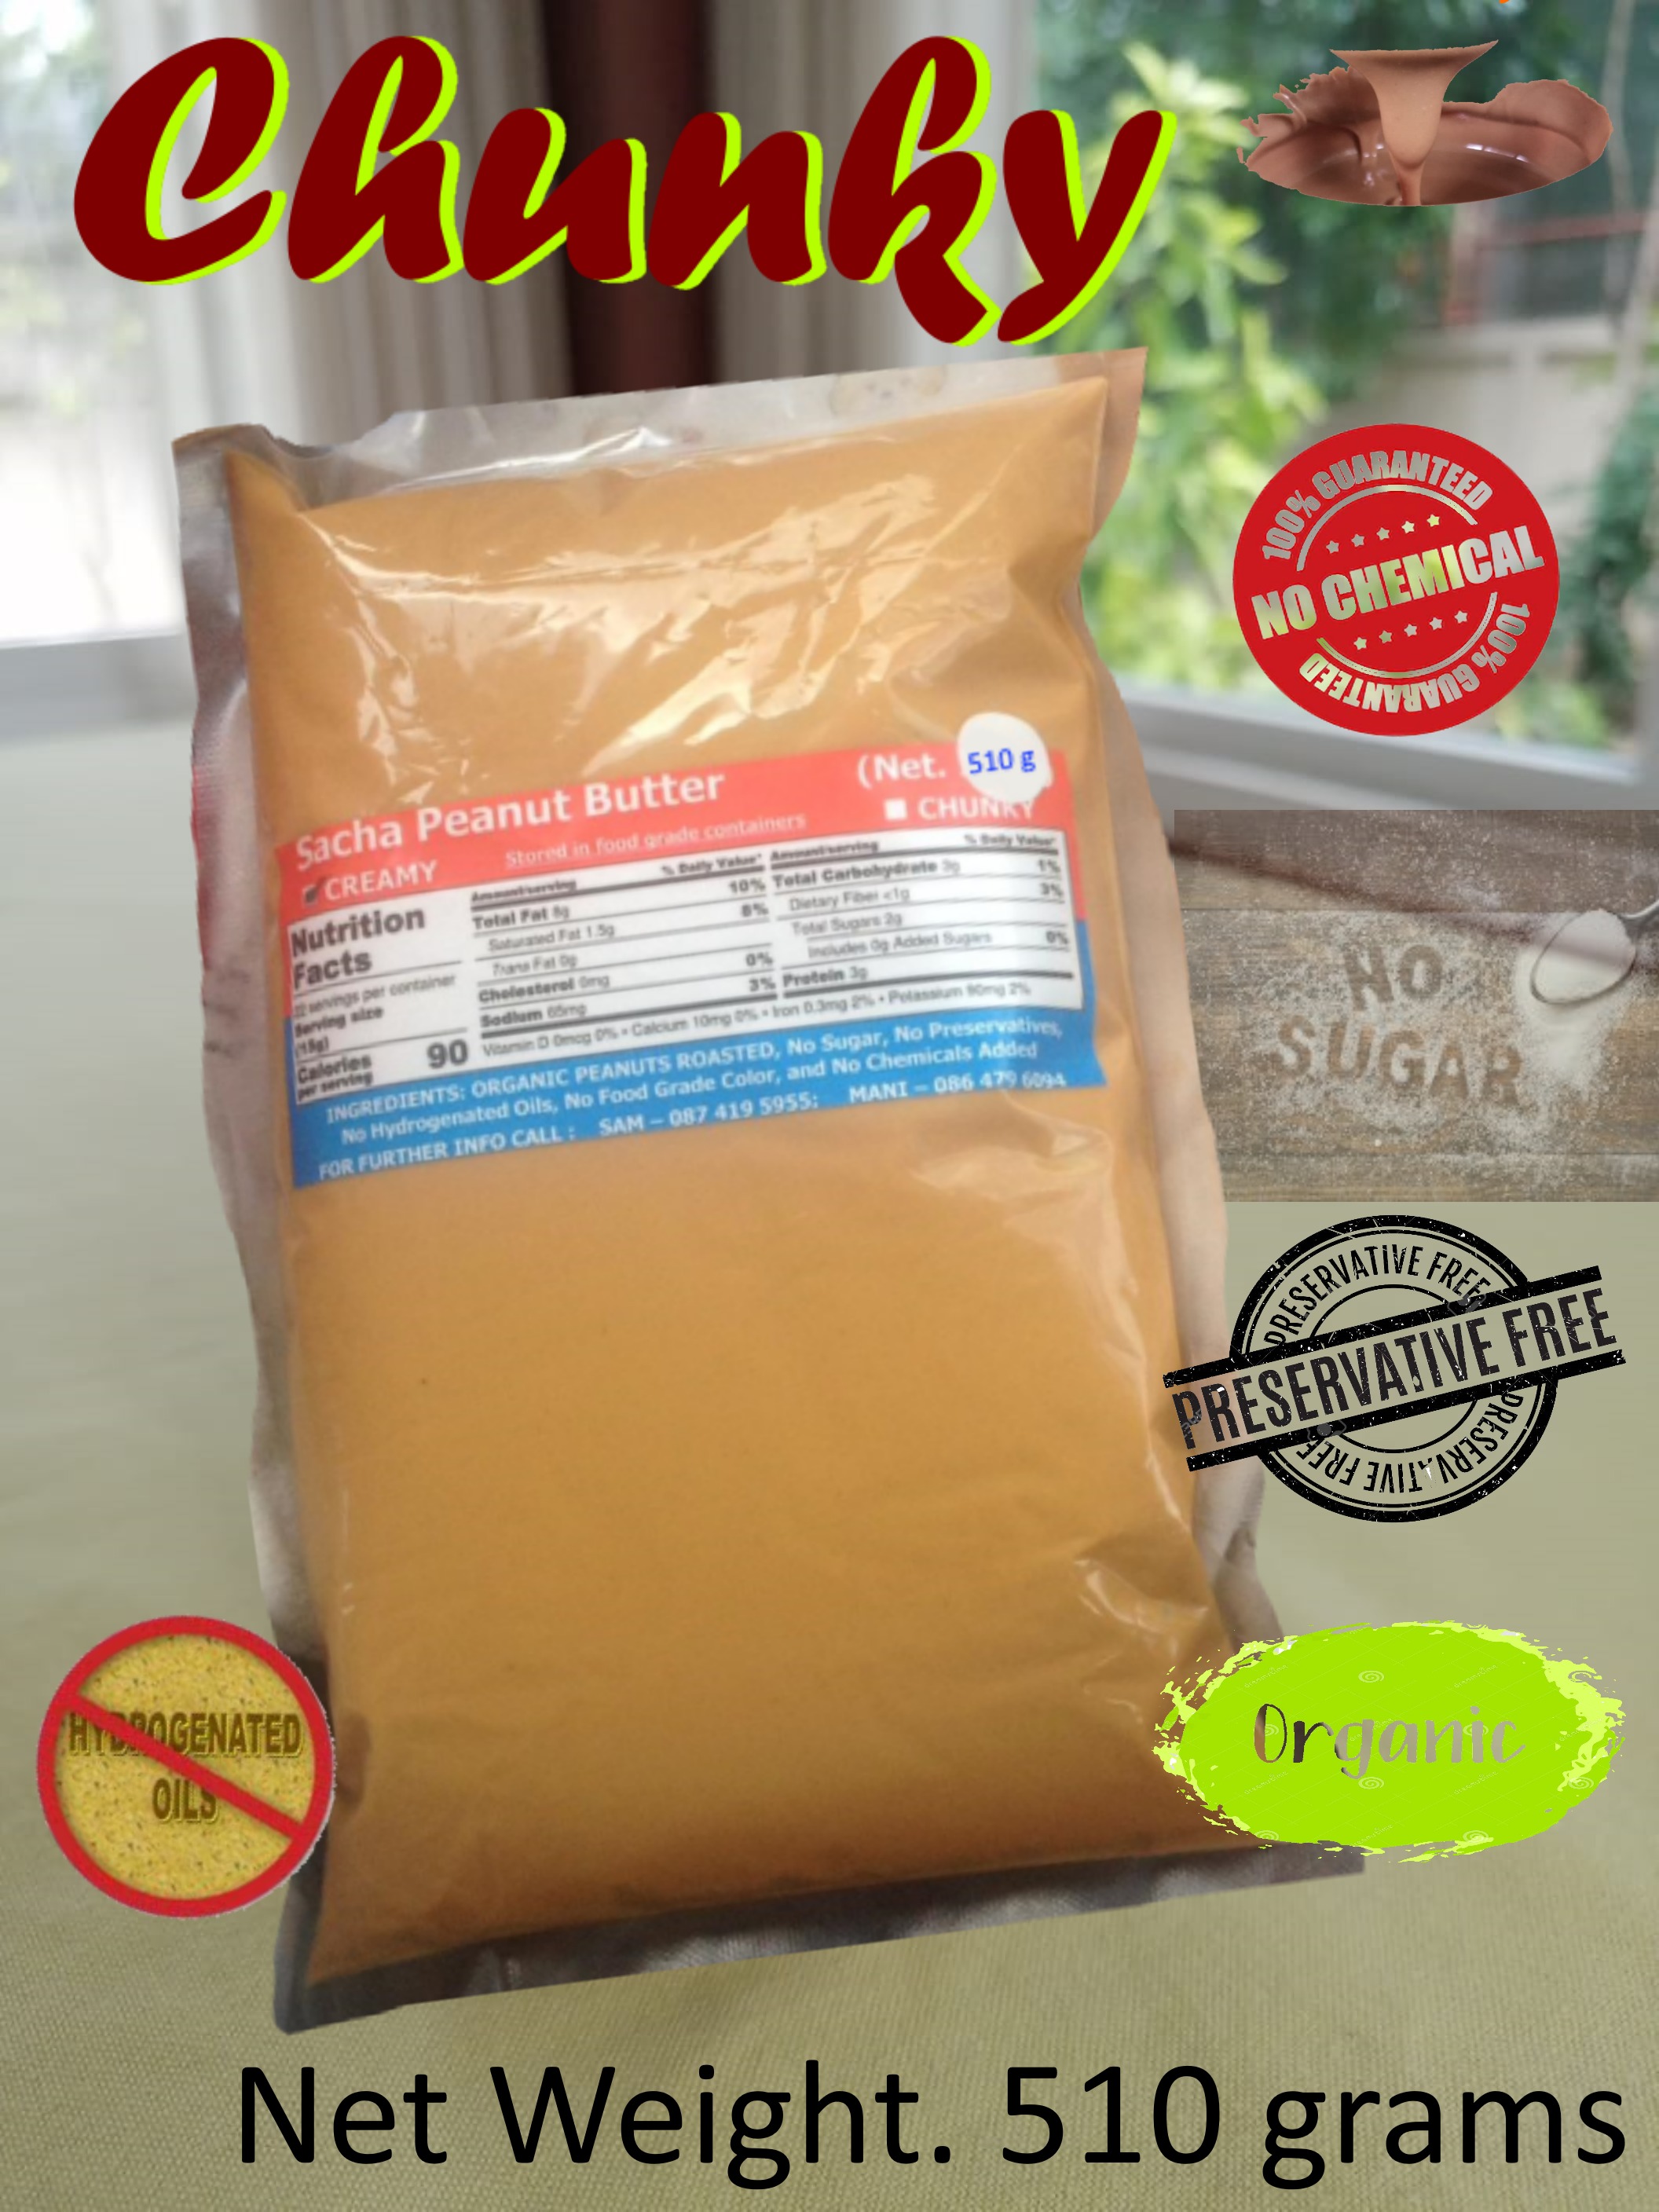 Sacha Peanut Butter (Chunky) All Natural Organic (510 grams) - Free Delivery, ซาช่า-เนยถั่ว (ส่งฟรี)